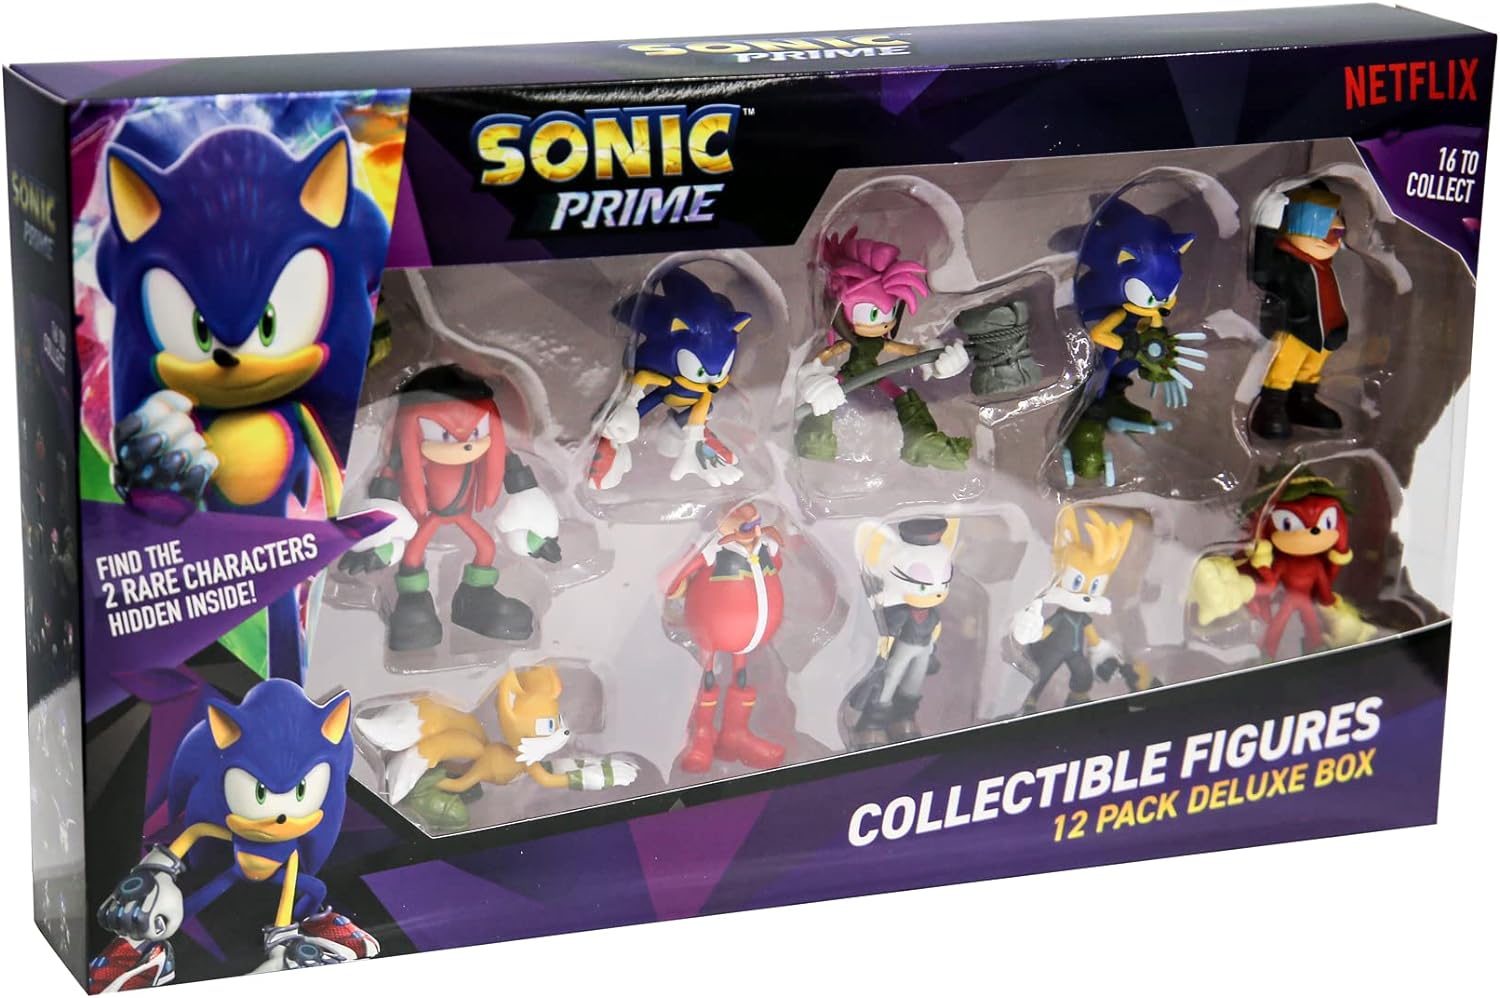 Sonic Prime Collectable 25cm Figures 12 Pack Deluxe Box